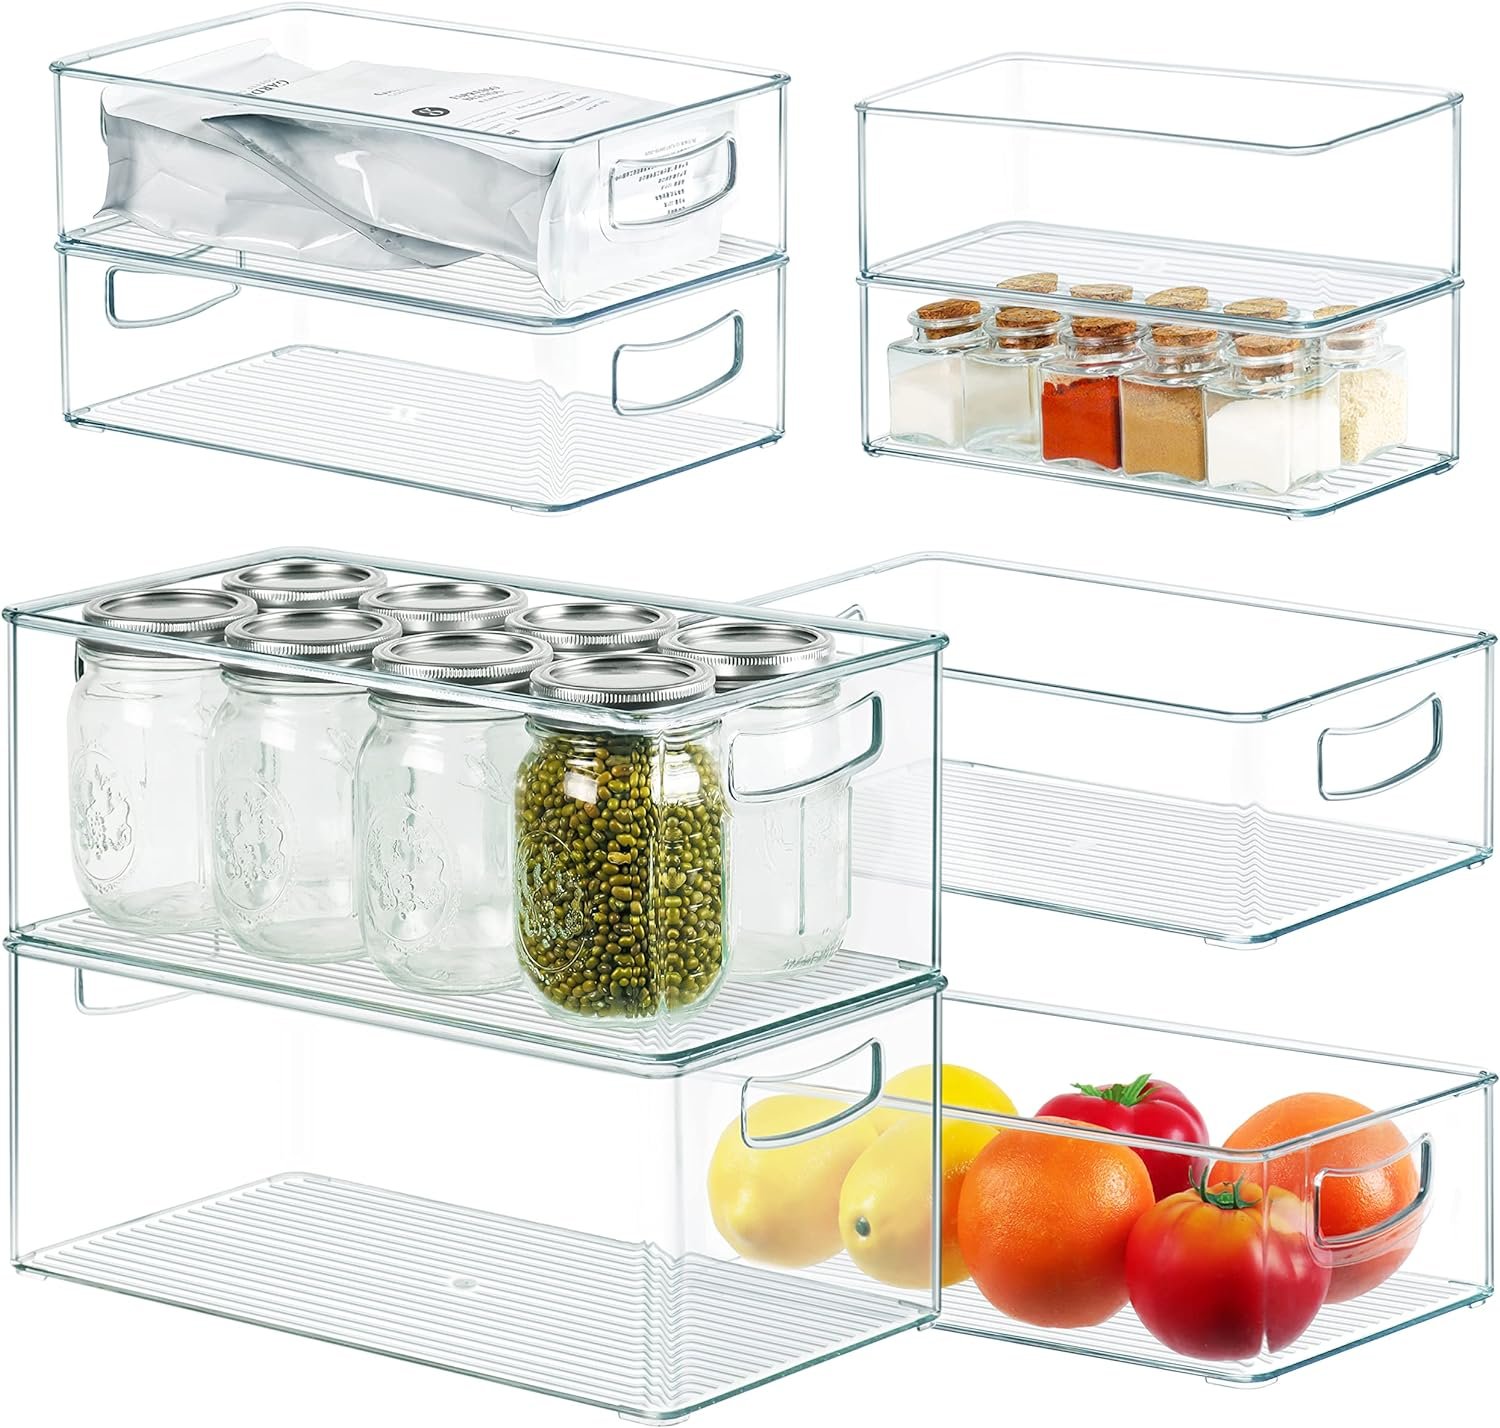 Qilinba Clear Storage Bins Stackable 8 PACK Containers for Organizing, Plastic Multi-size Organizer Bins for Home Edit and Pantry Cabinet Organizers